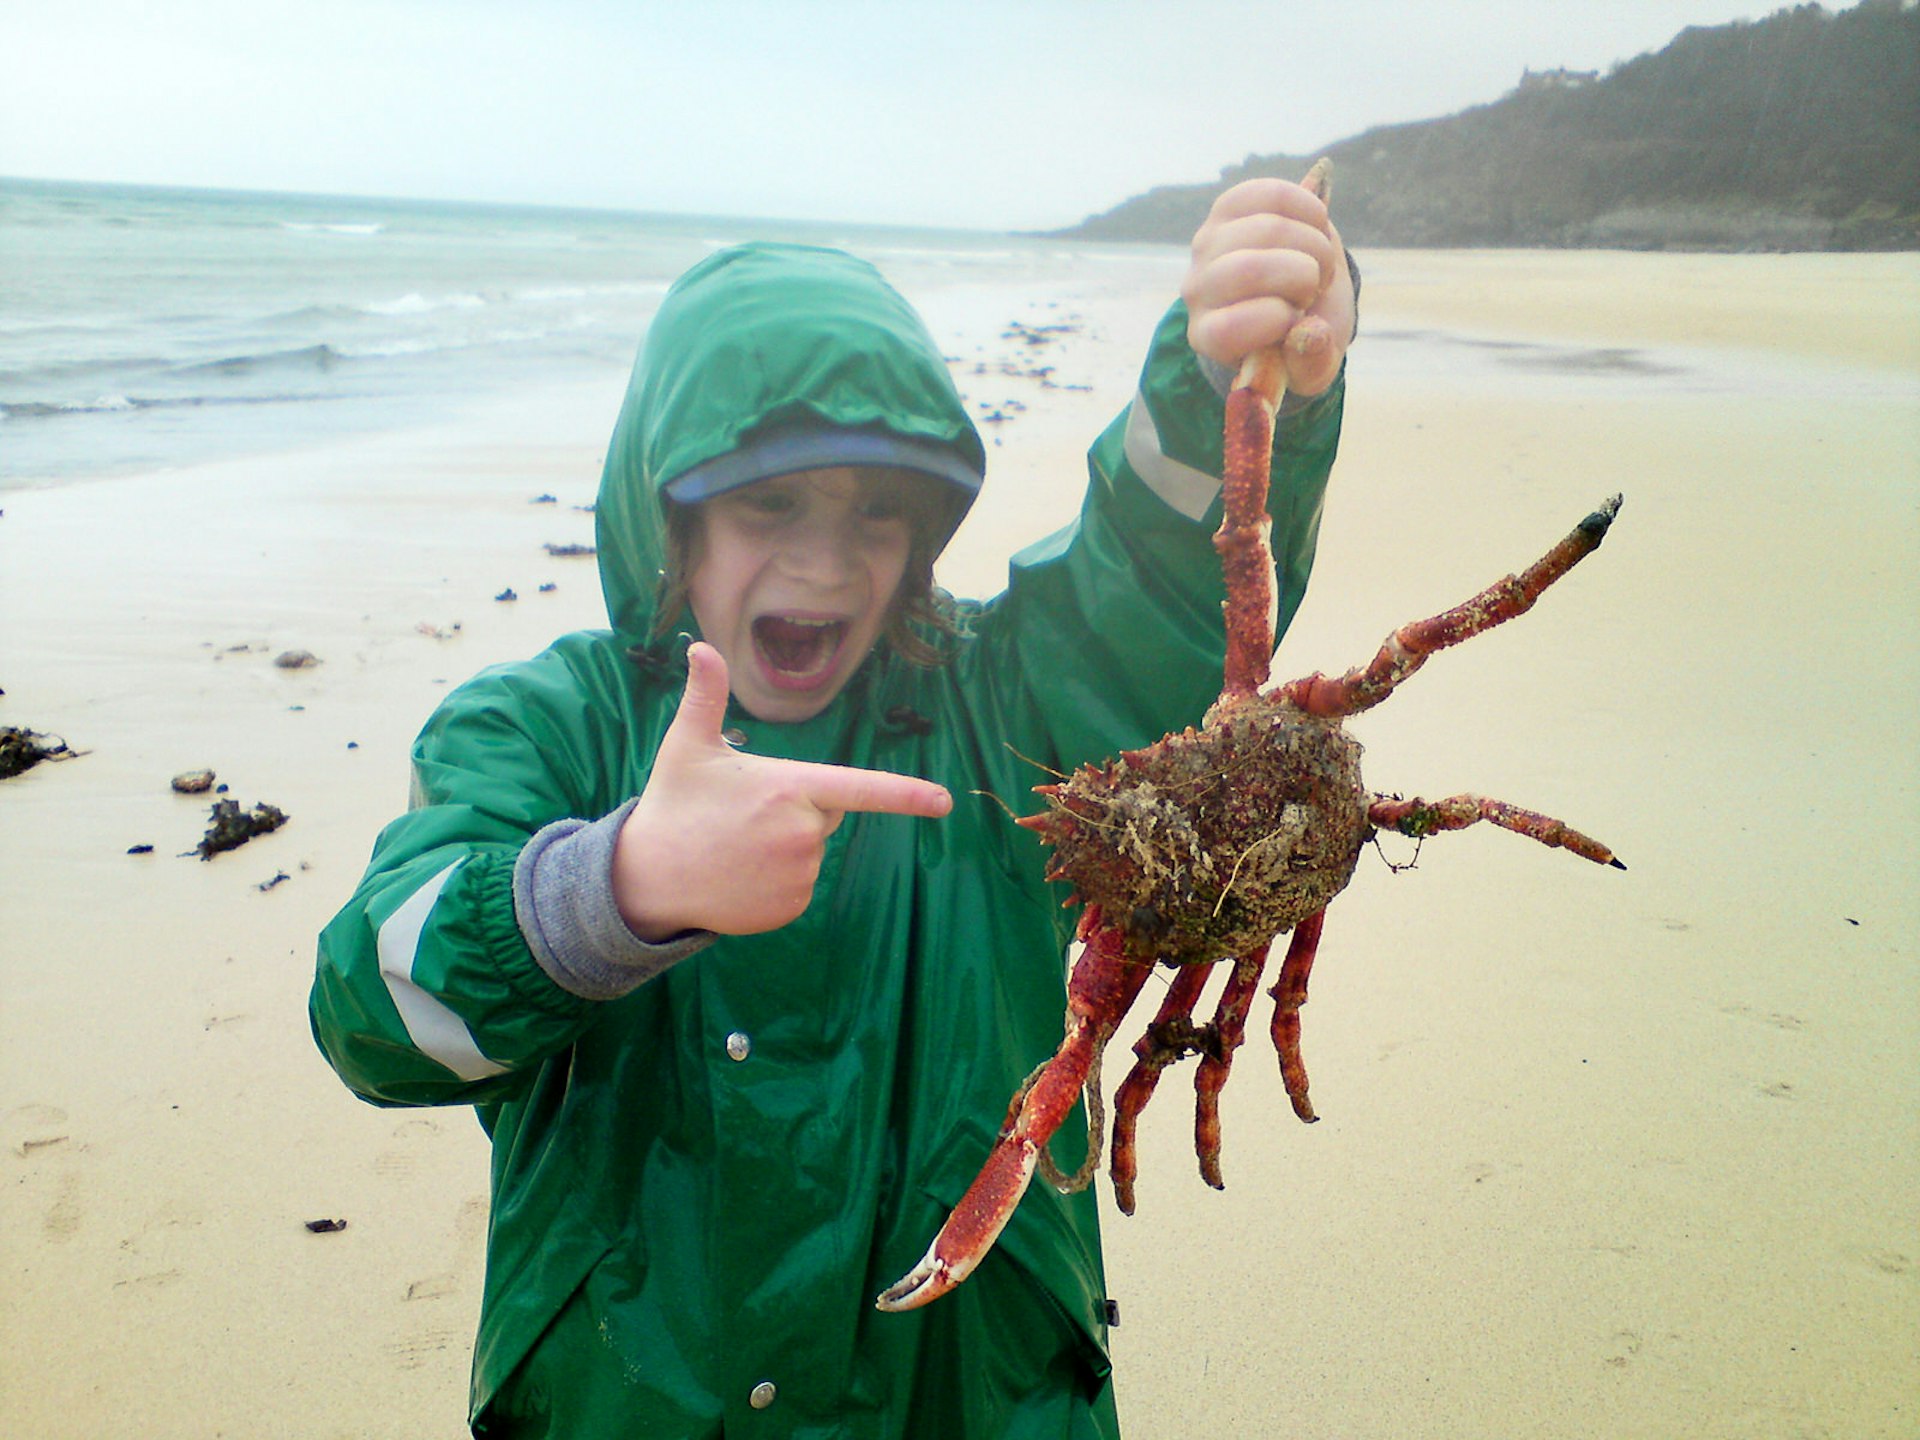 Child holds up a giant crab on a rainy beach © Philippastanton / Getty Images